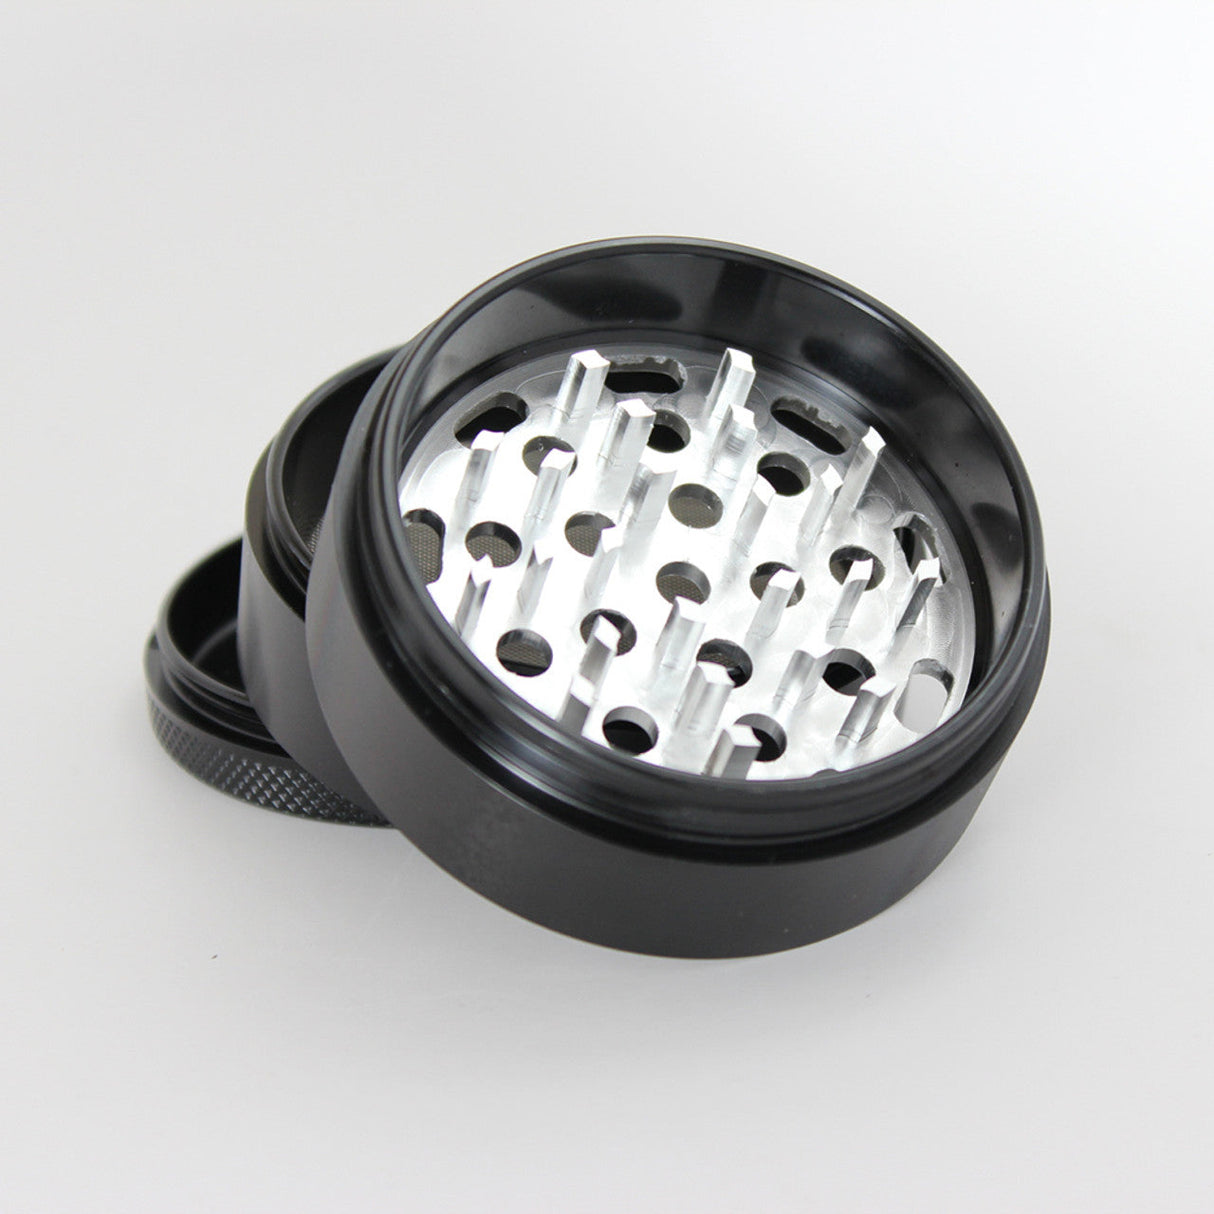 Sharpstone Black 4-Piece Grinder with Mill Handle and Glass Top, 2.5" Diameter, Portable Design